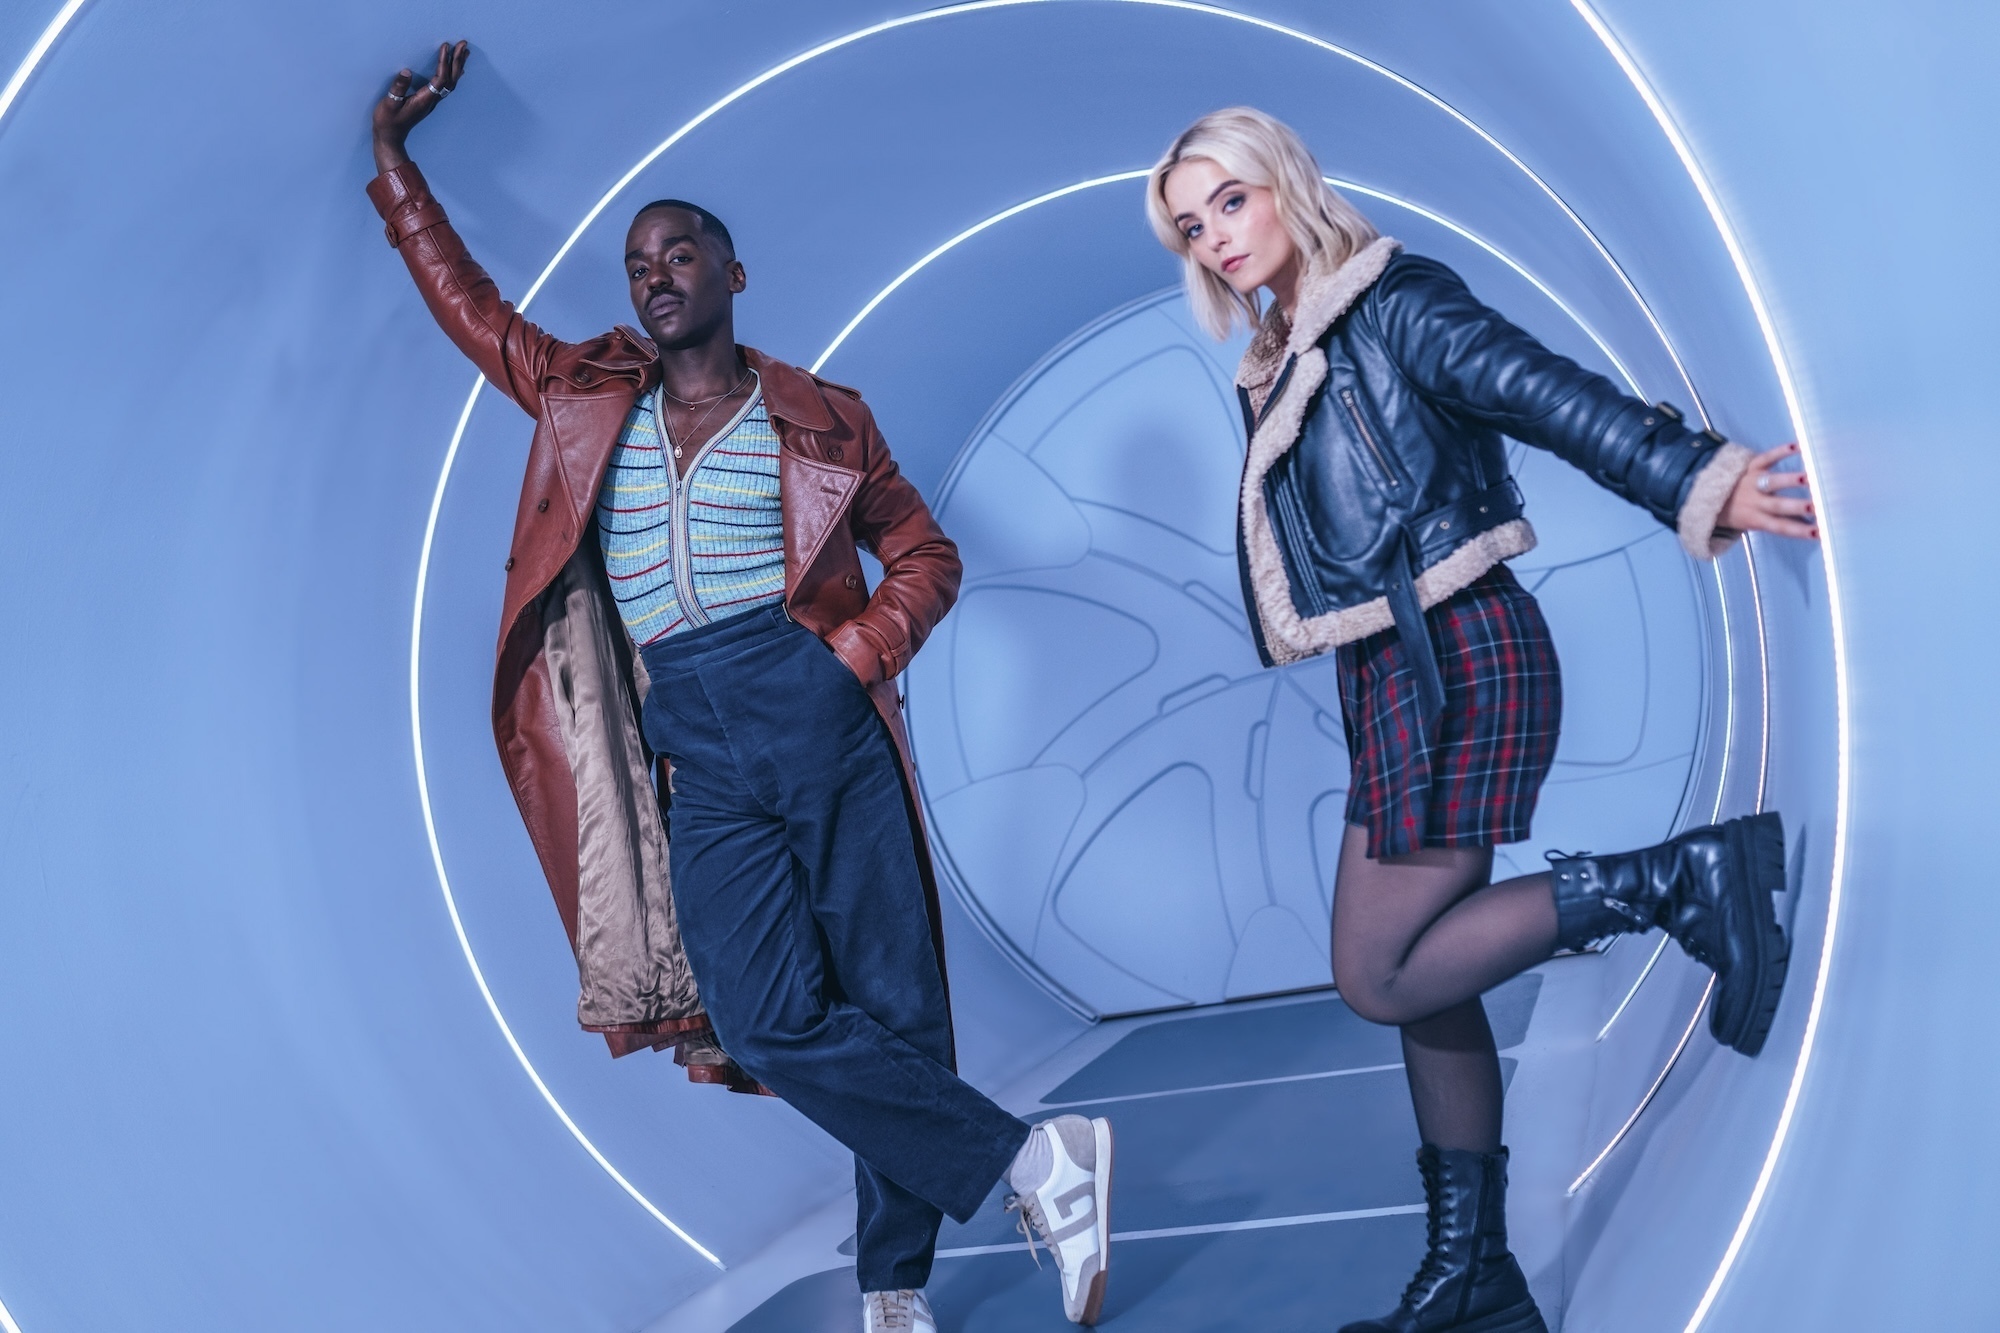 'Doctor Who': New Trailer Sees Ncuti Gatwa And Millie Gibson Travel Through Time And Space